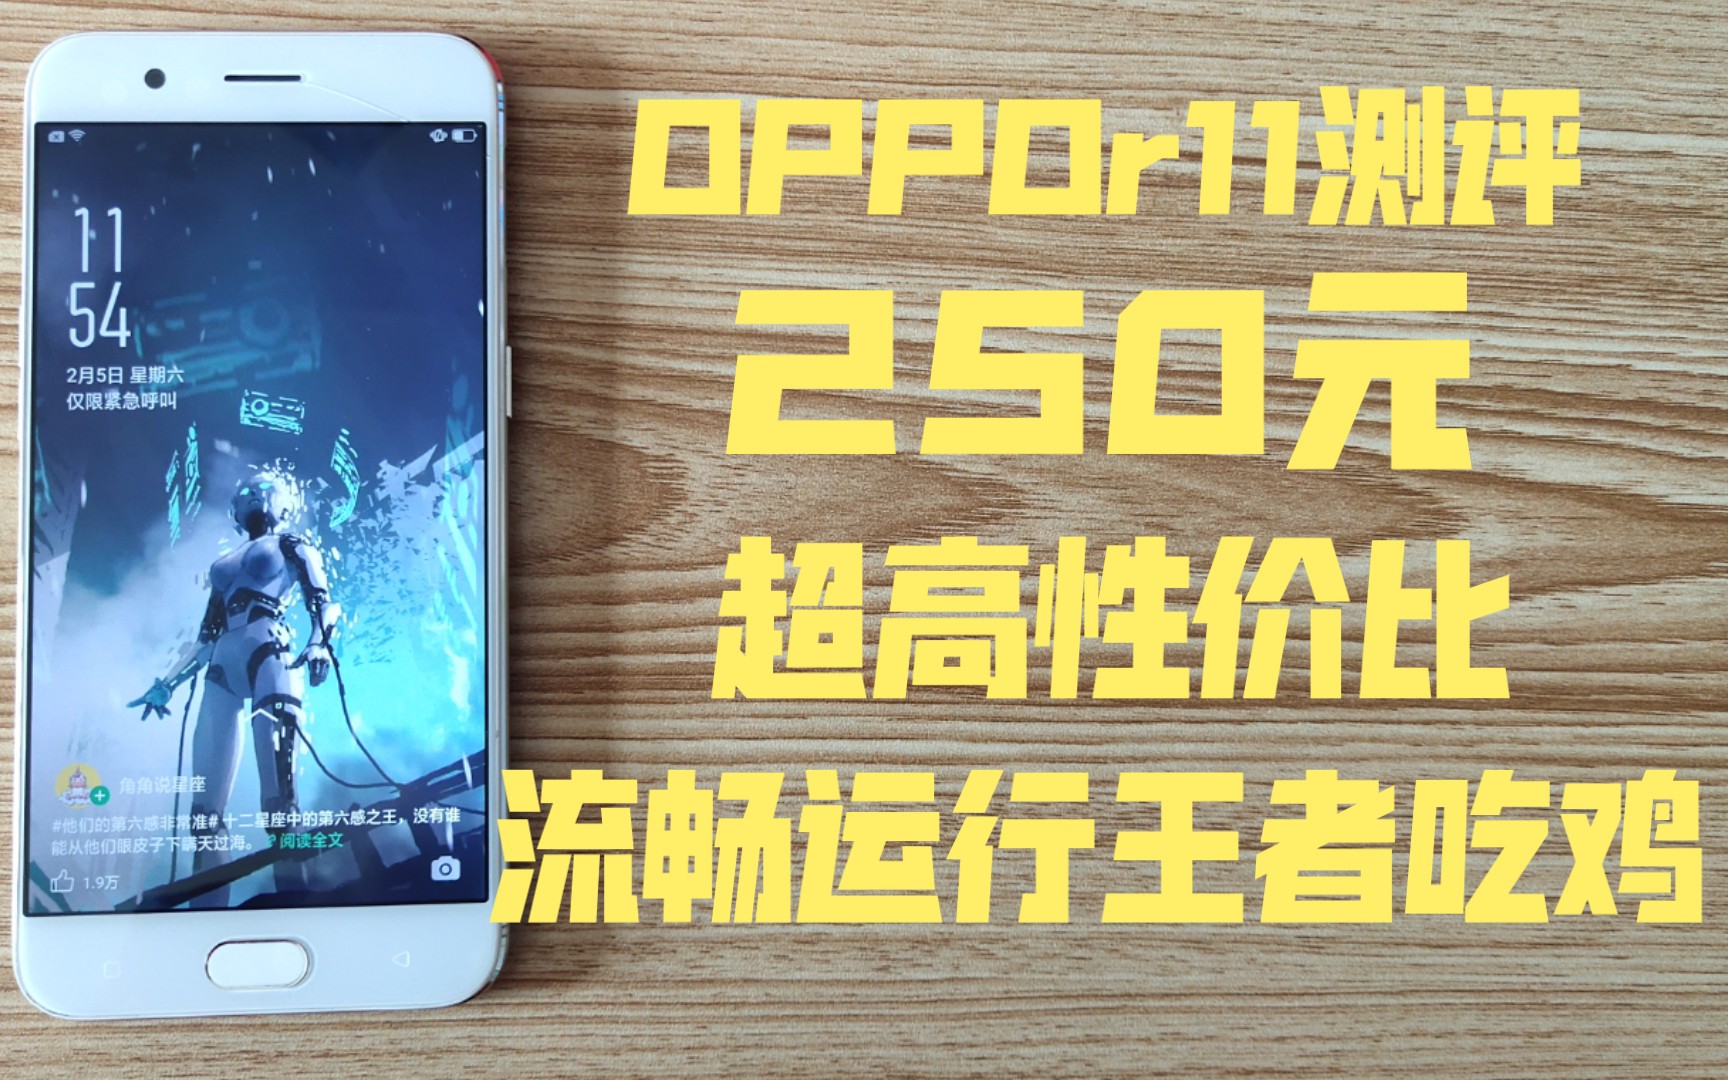 Oppo R11s and R11s Plus officially announced with 'special Starry Sky screen' edition - Ausdroid